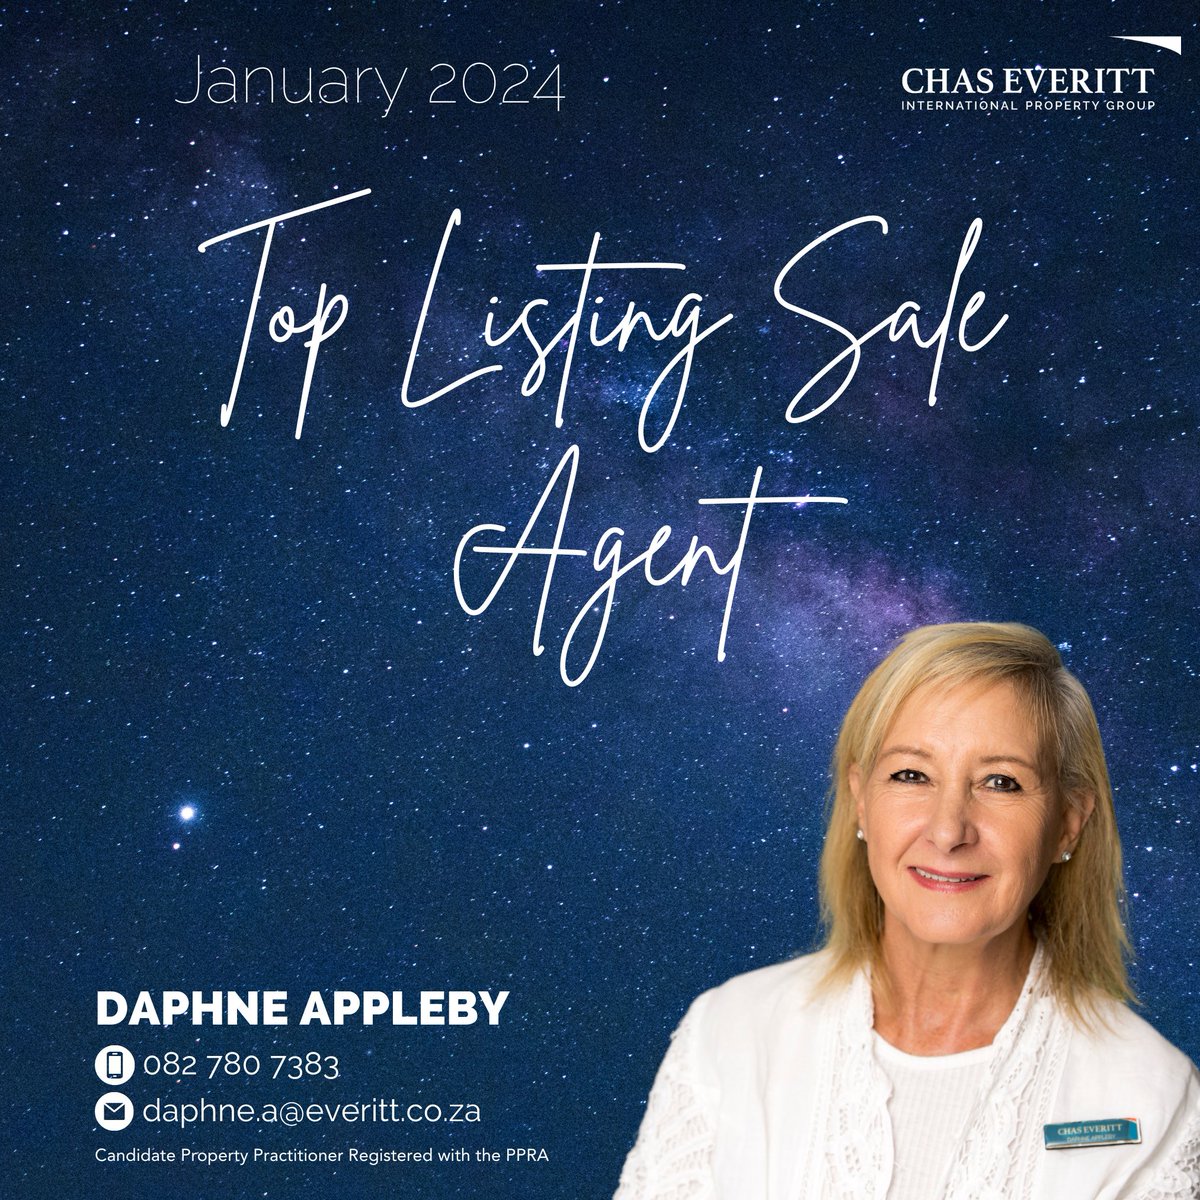 Top Listing Sales Agents
Well Done to Our Top Listing Sales Agent for January 2024, Daphne Appleby 082 780 7383!

#top #TopListingAgent #PropertyPractitioner #topagent #welldone #proud #bestofthebest #fyp #fypシ